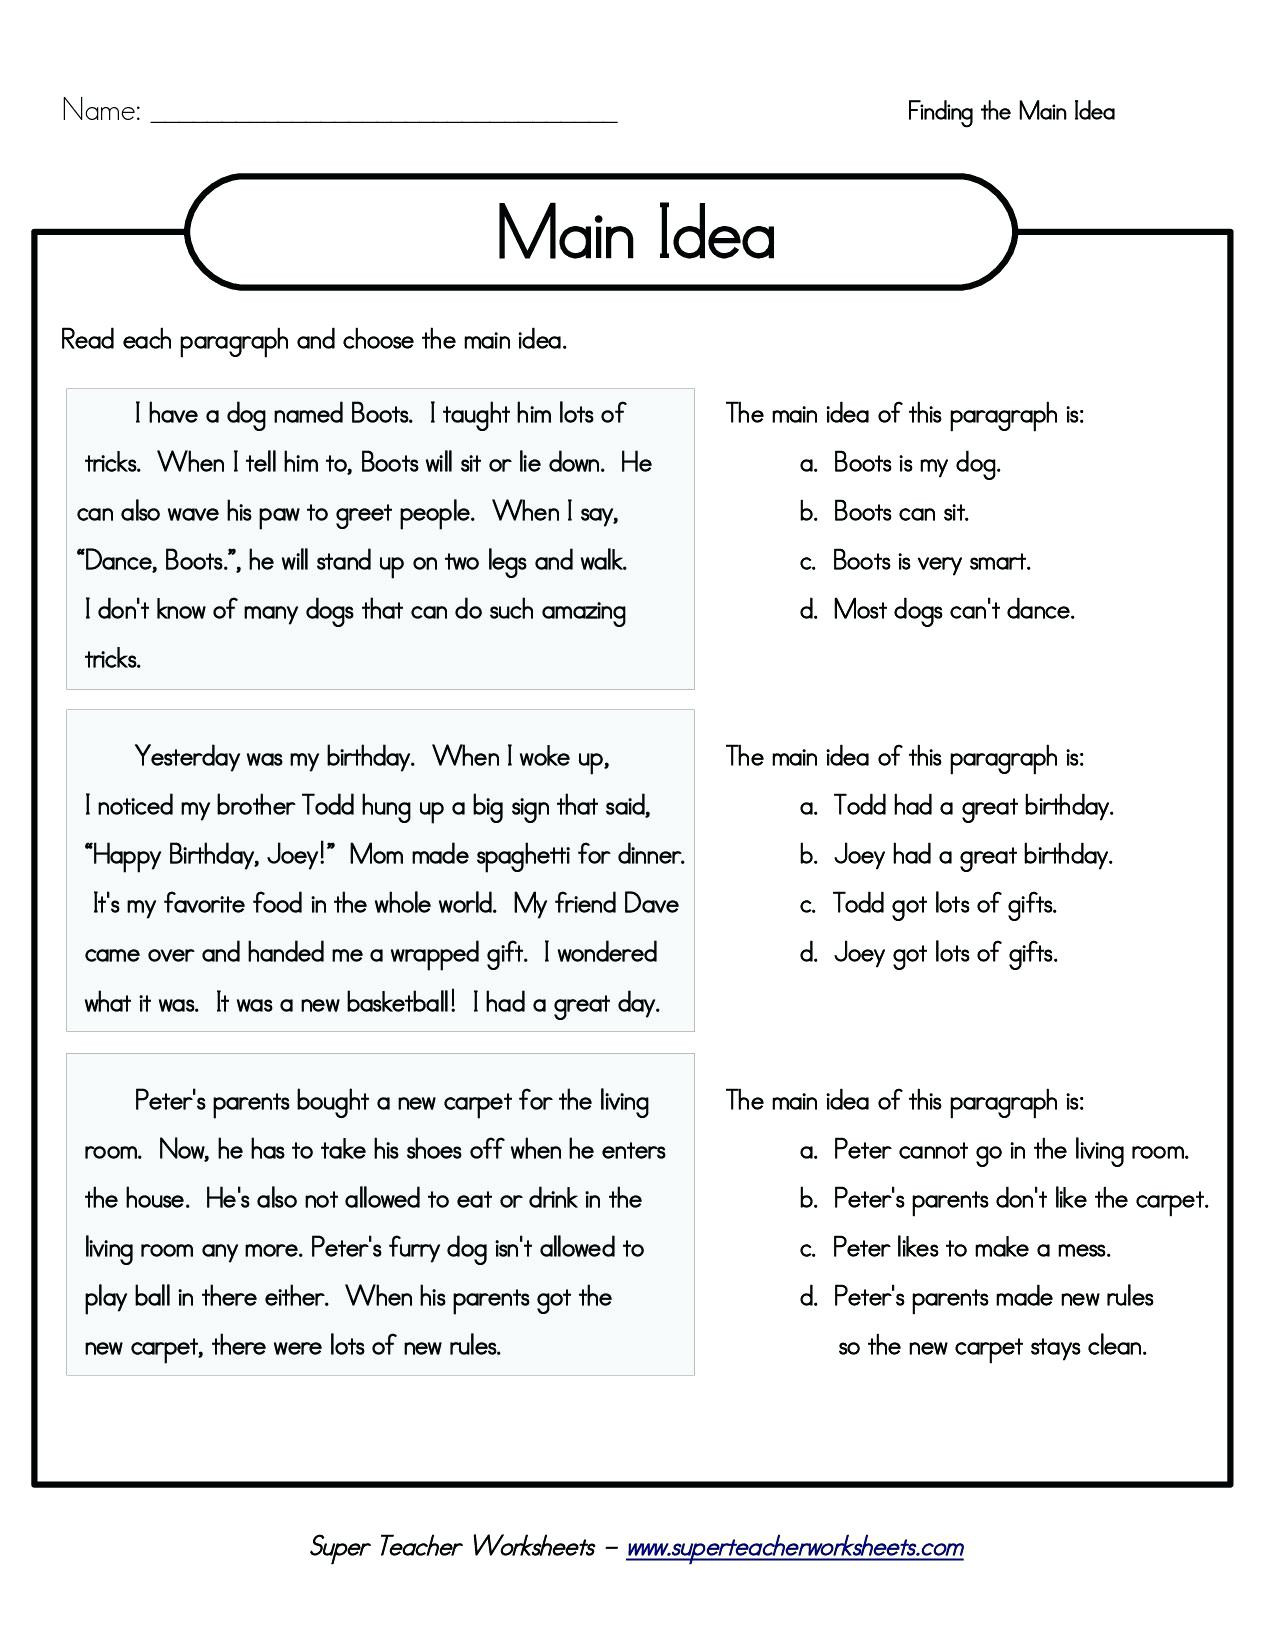 Free Math Worksheets Second Grade 2 Subtraction Subtract 3 Digit Missing Numbers No Regrouping